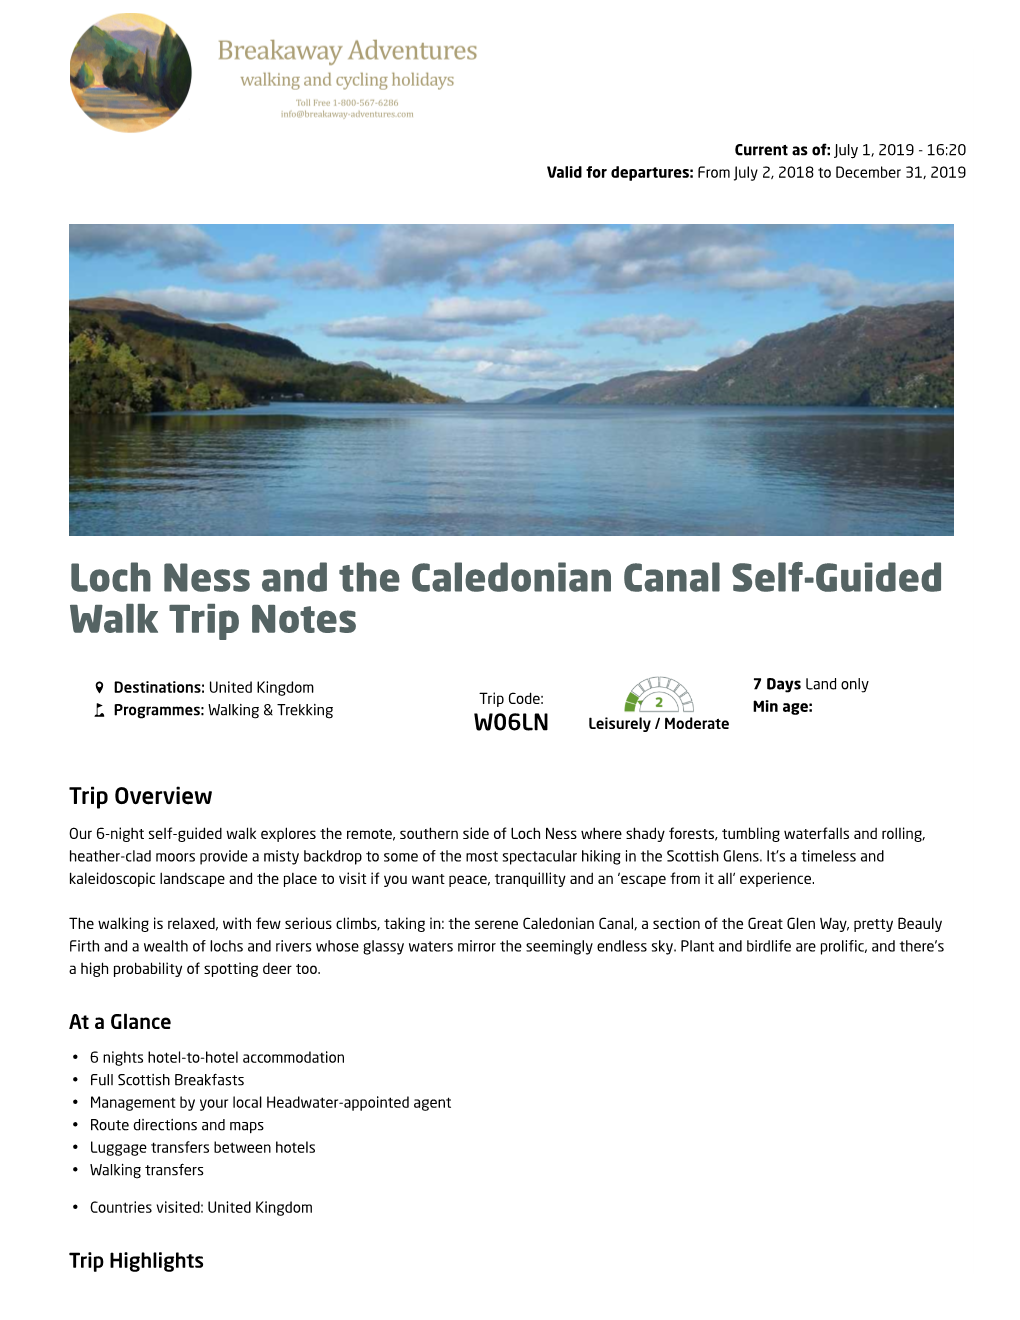 Loch Ness and the Caledonian Canal Self-Guided Walk Trip Notes